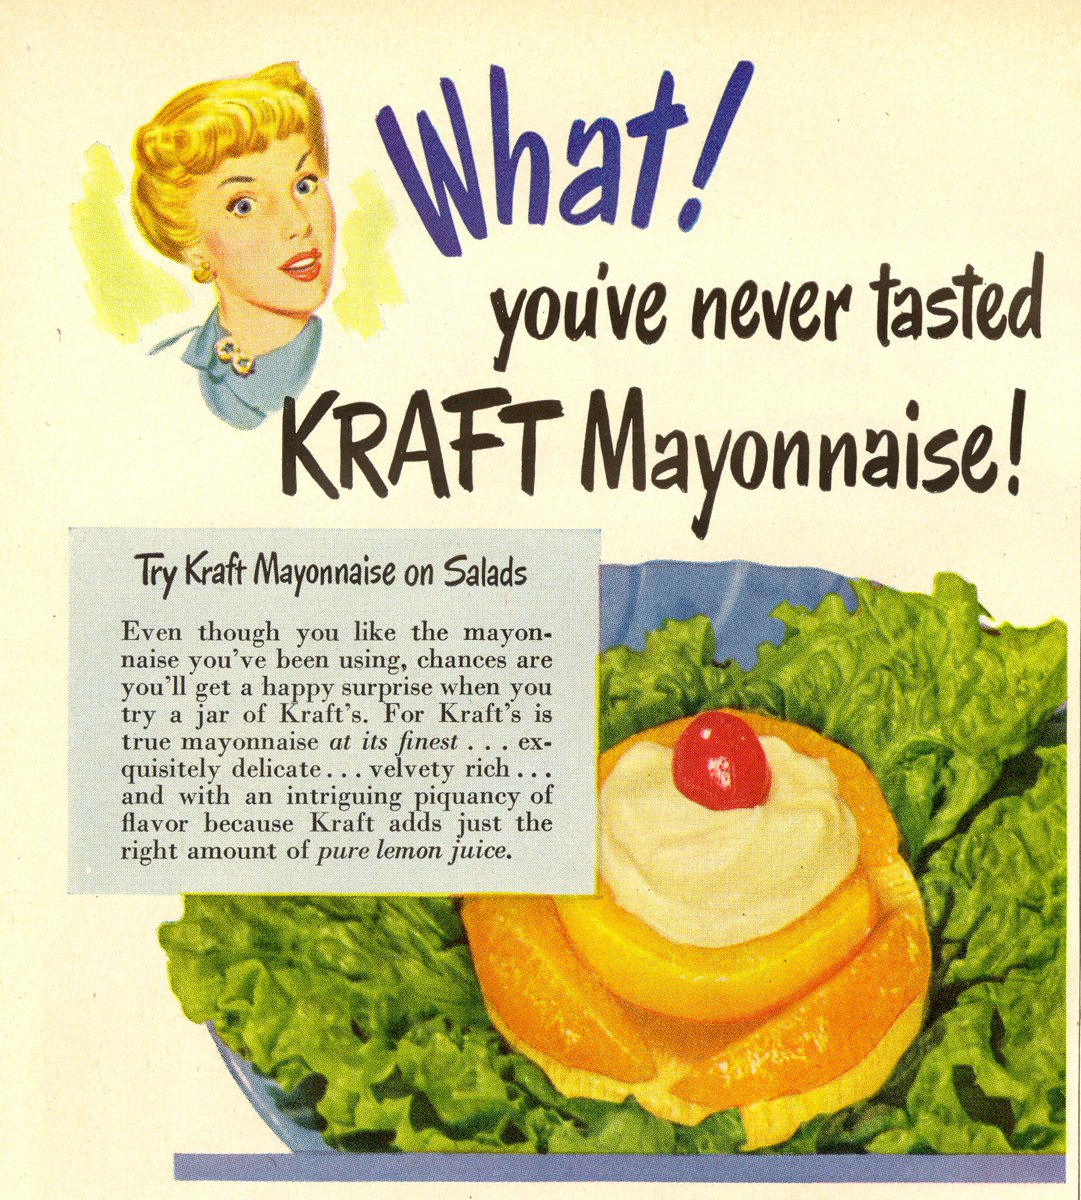 You've never tasted  @KraftBrand Mayonnaise? It has a *checks notes* Intriguing Piquancy Of Flavor!